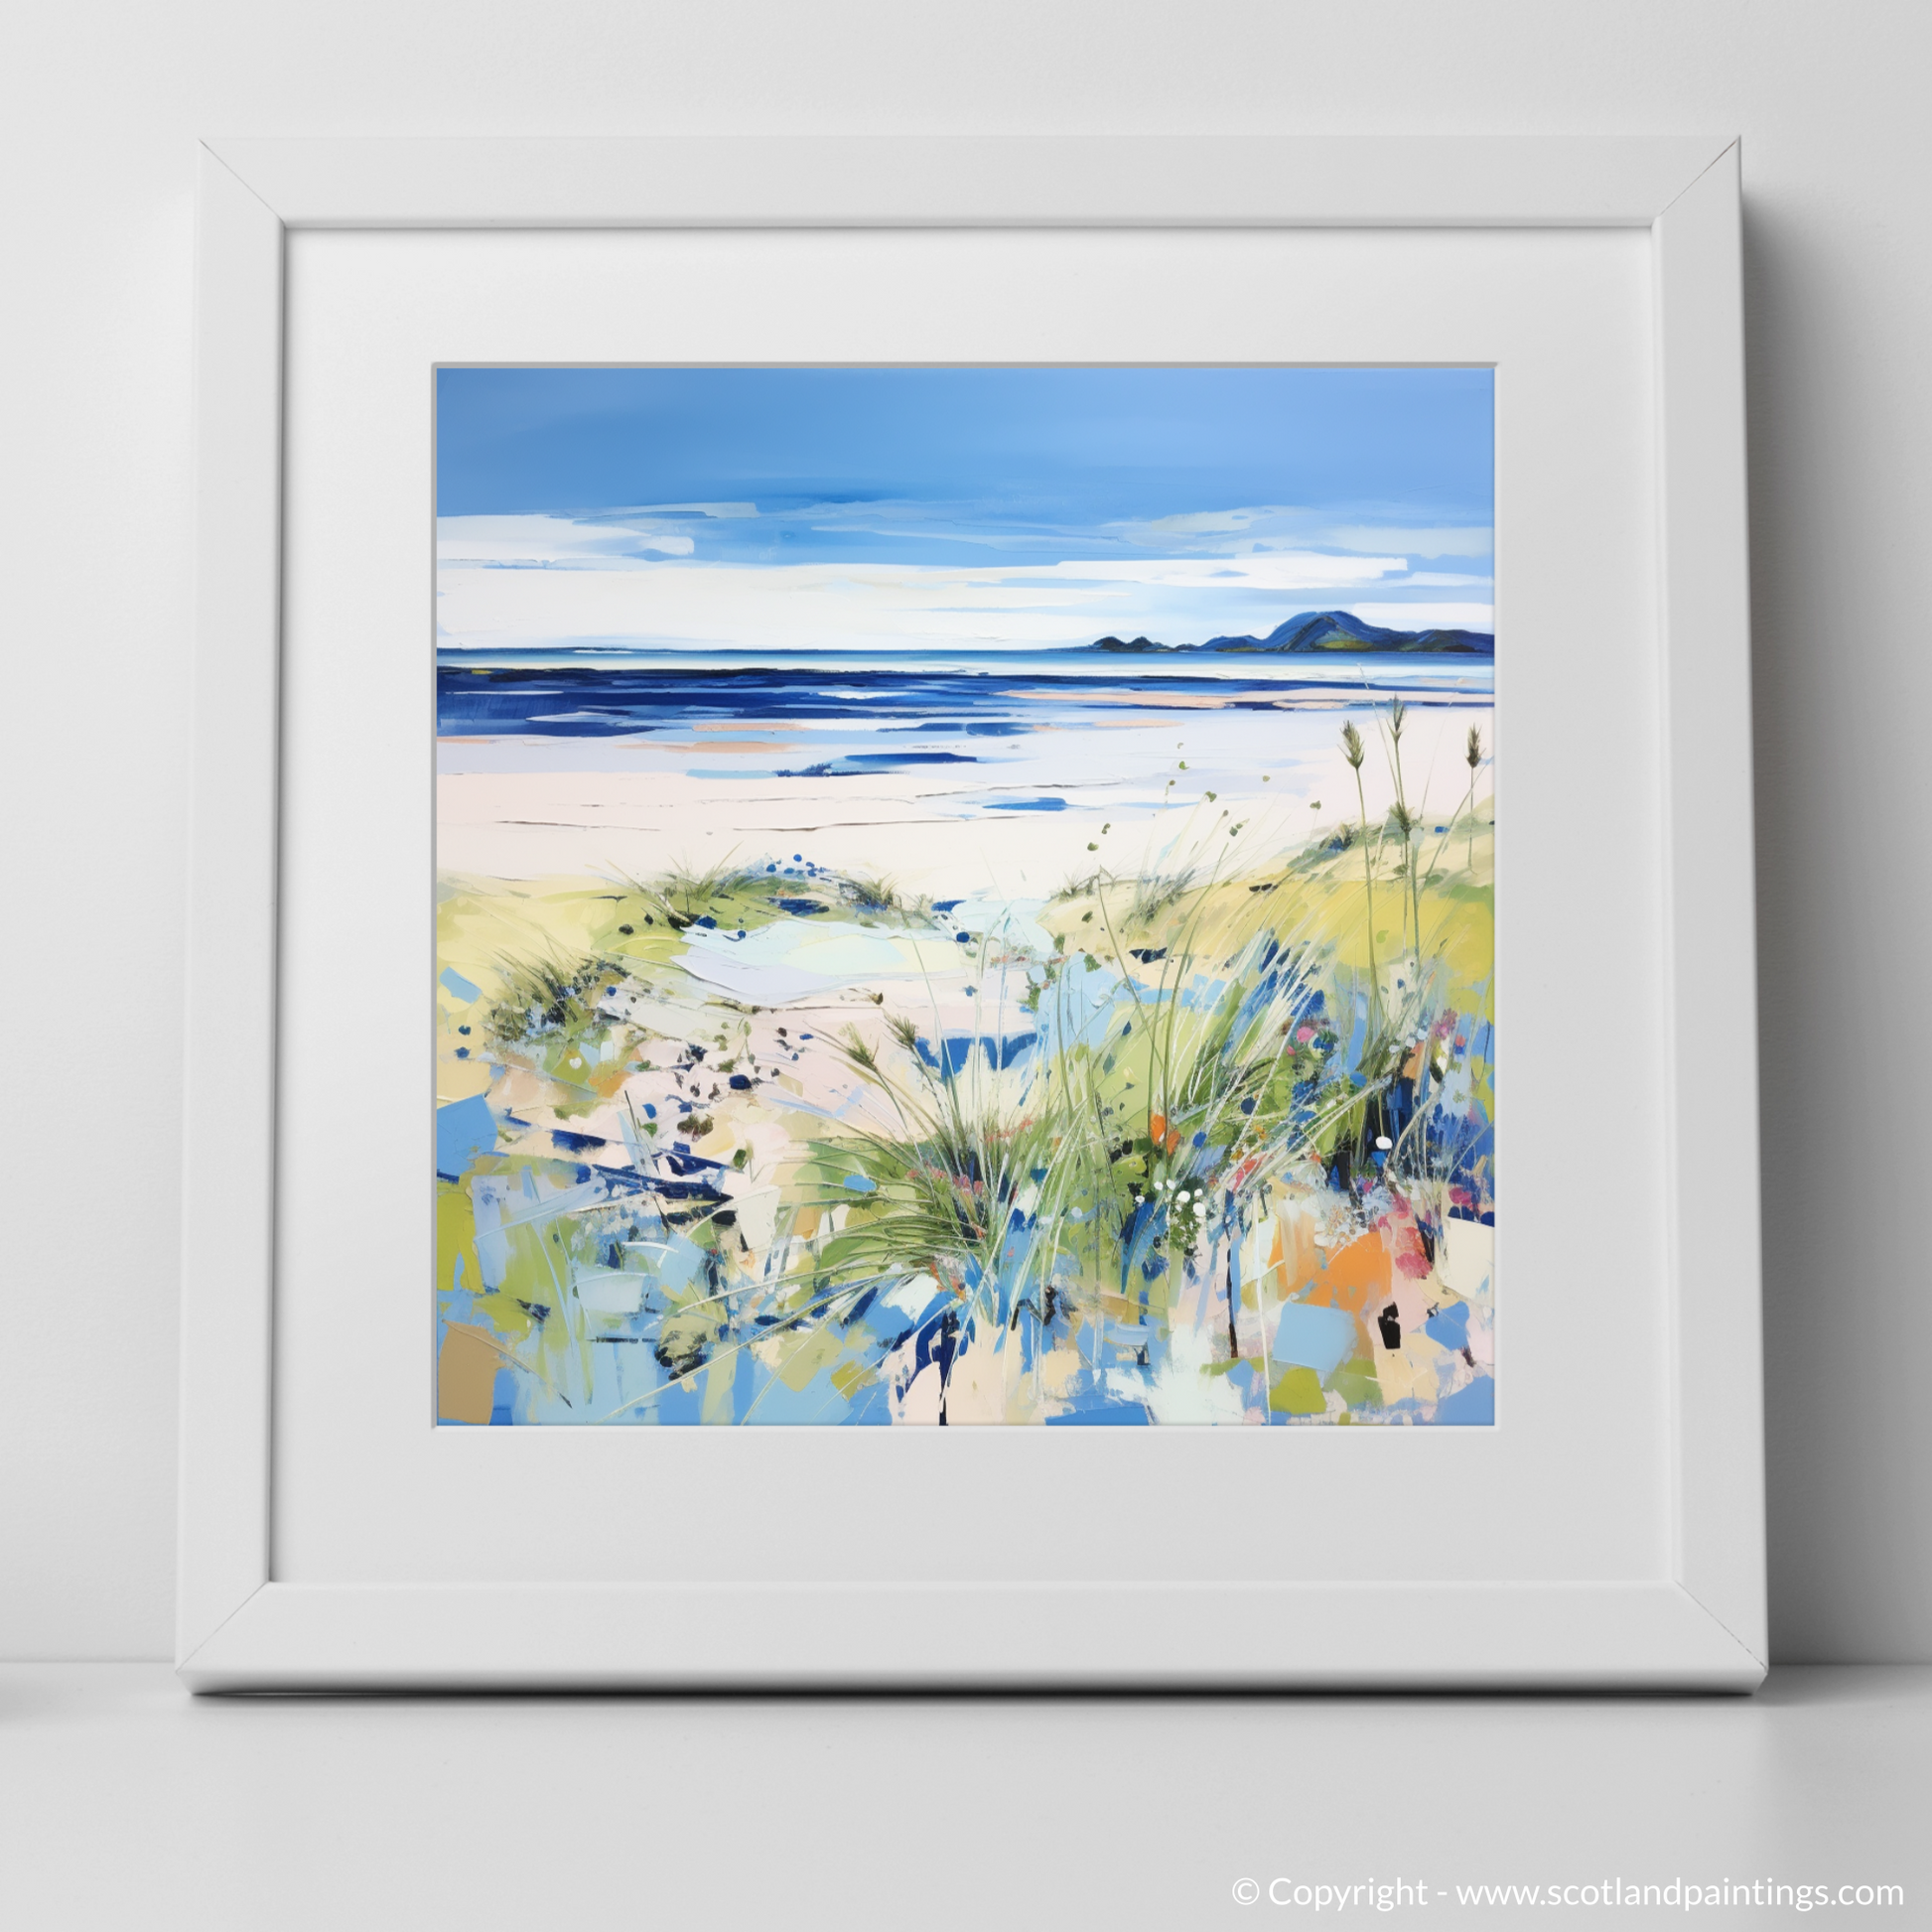 Art Print of Longniddry Beach, East Lothian in summer with a white frame